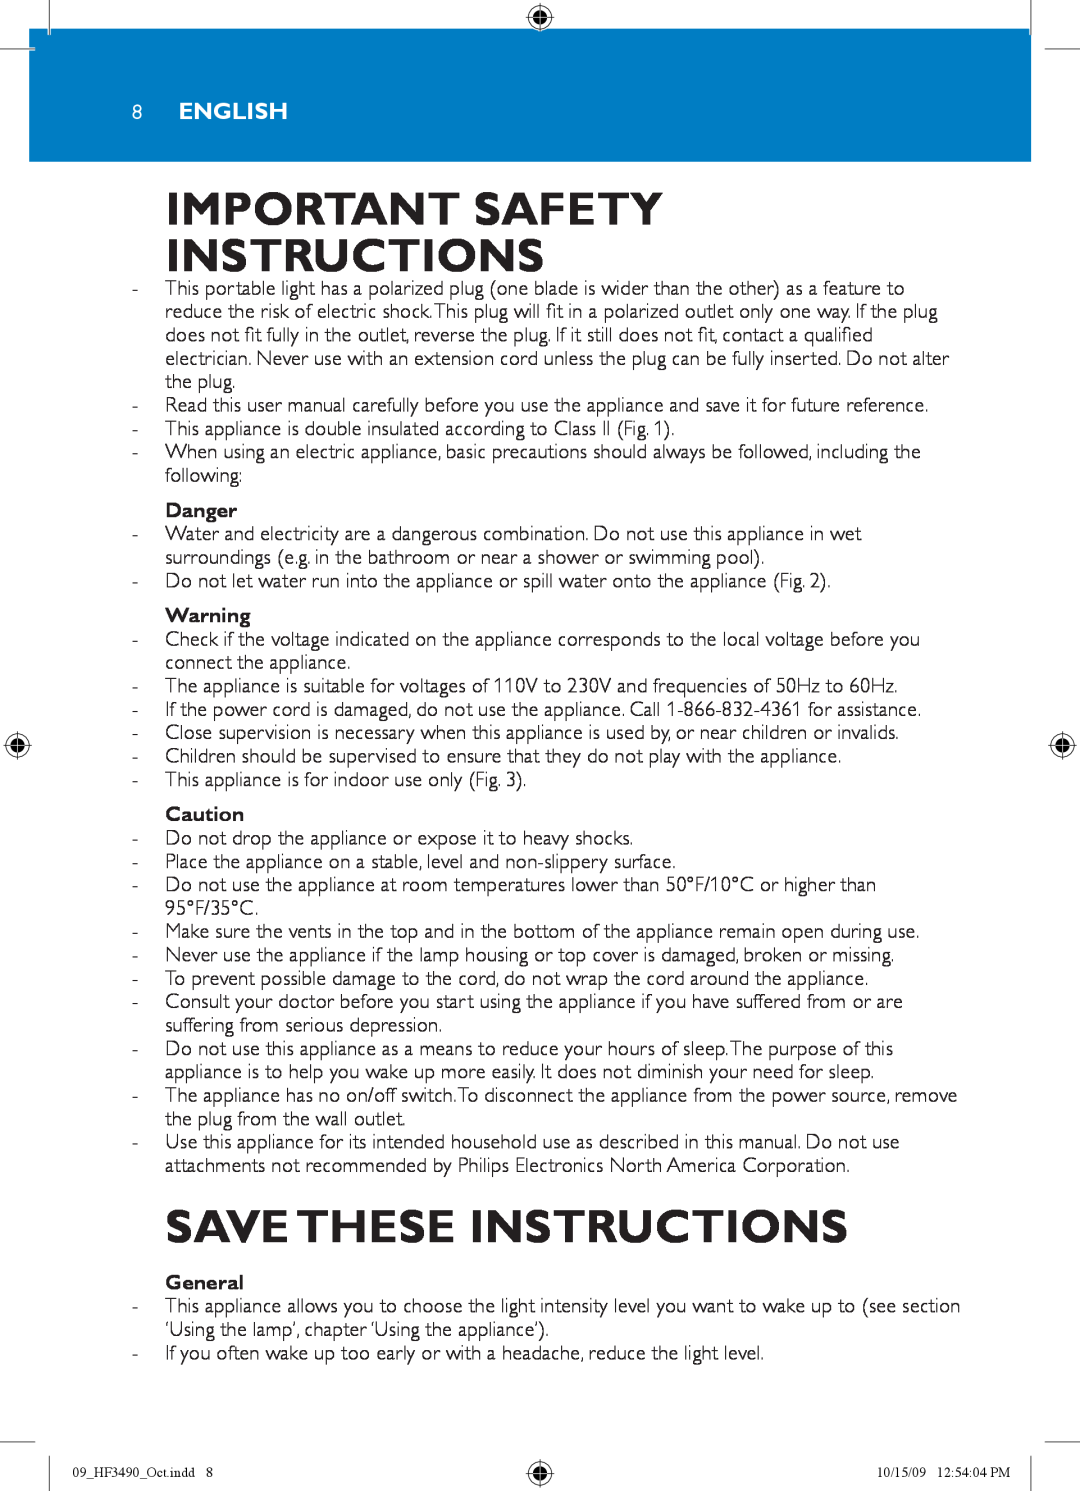 Philips HF3490/60 manual Important Safety Instructions, Save These Instructions, 8English, Danger, General 